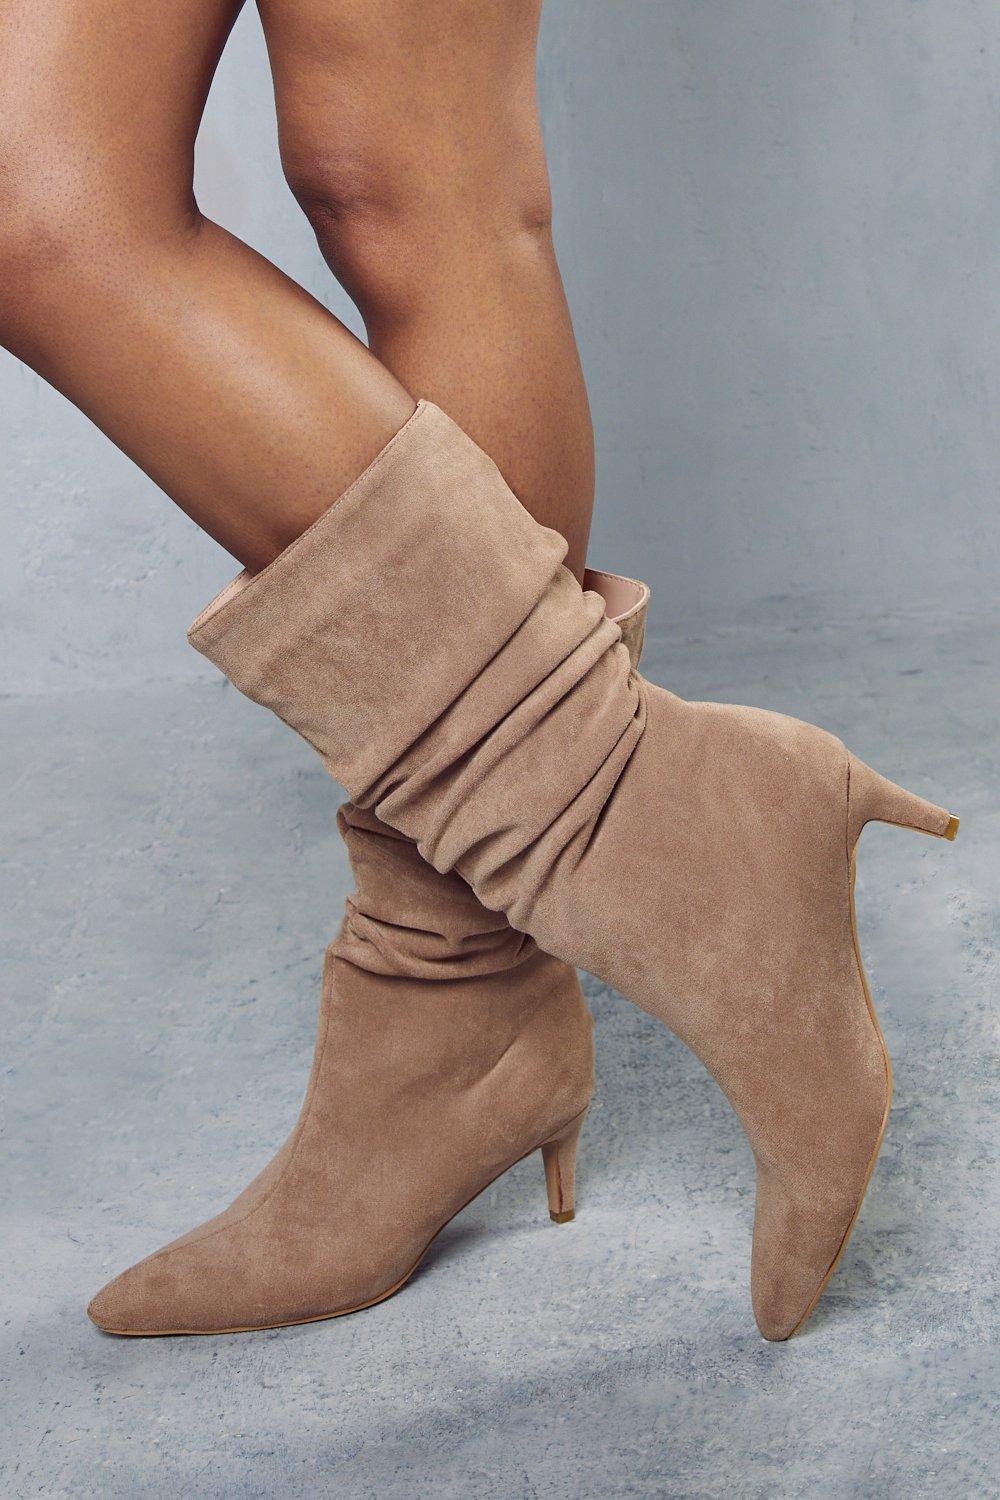 womens faux suede mid heel ankle boots - camel - 4, camel